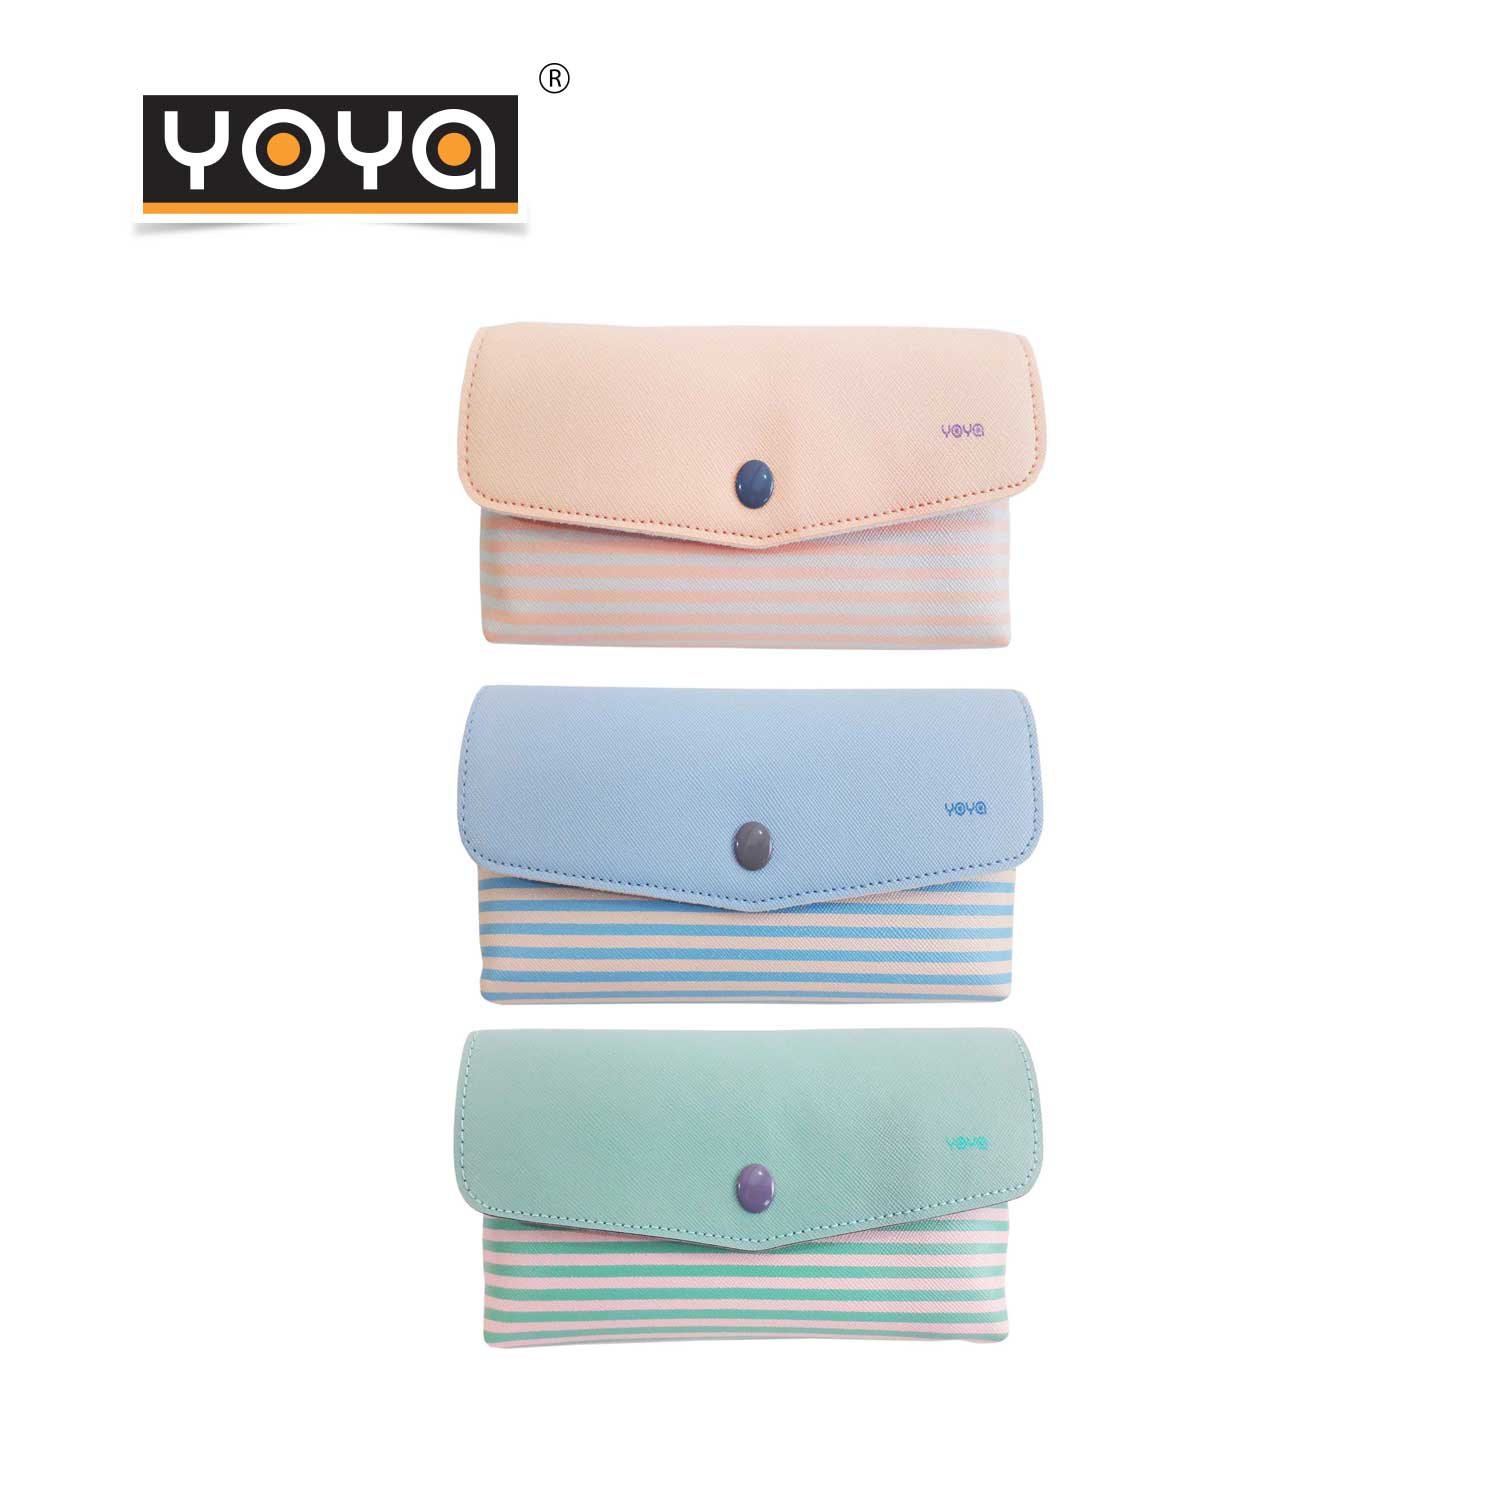 YOYA PU Leather Pencil Bag with Button : No. 7145